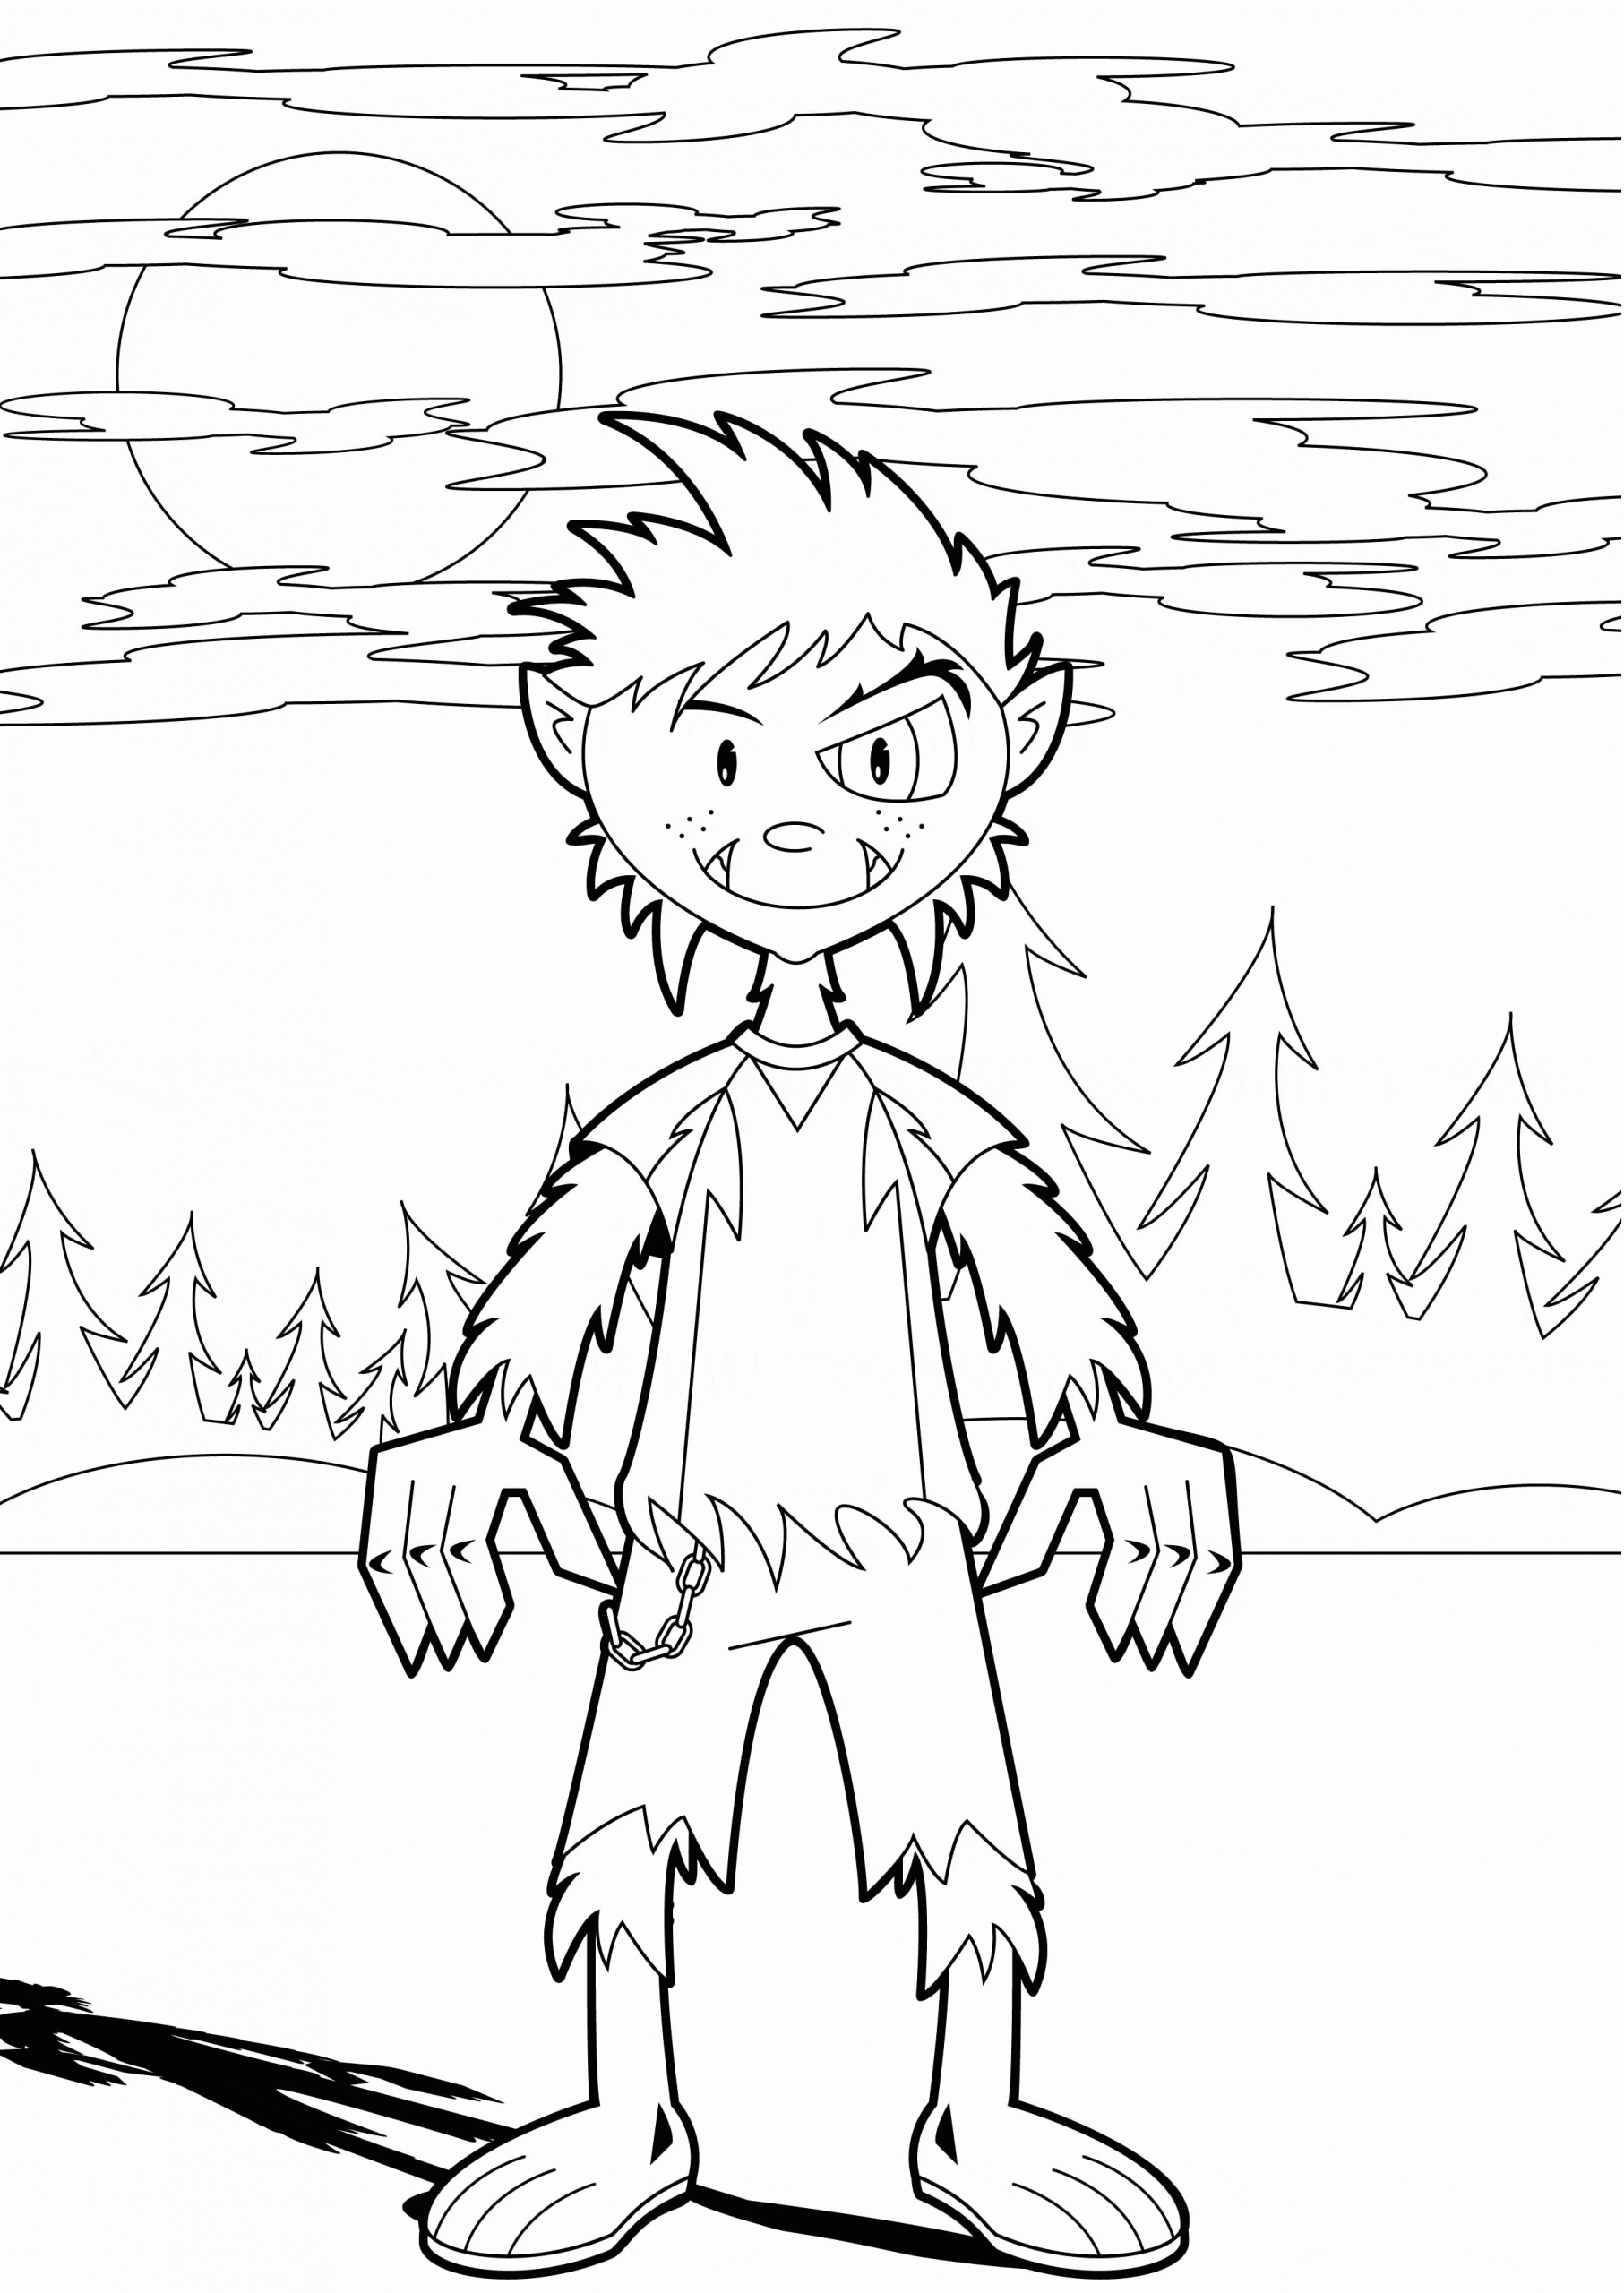 Halloween Coloring Pages Werewolf For Kids